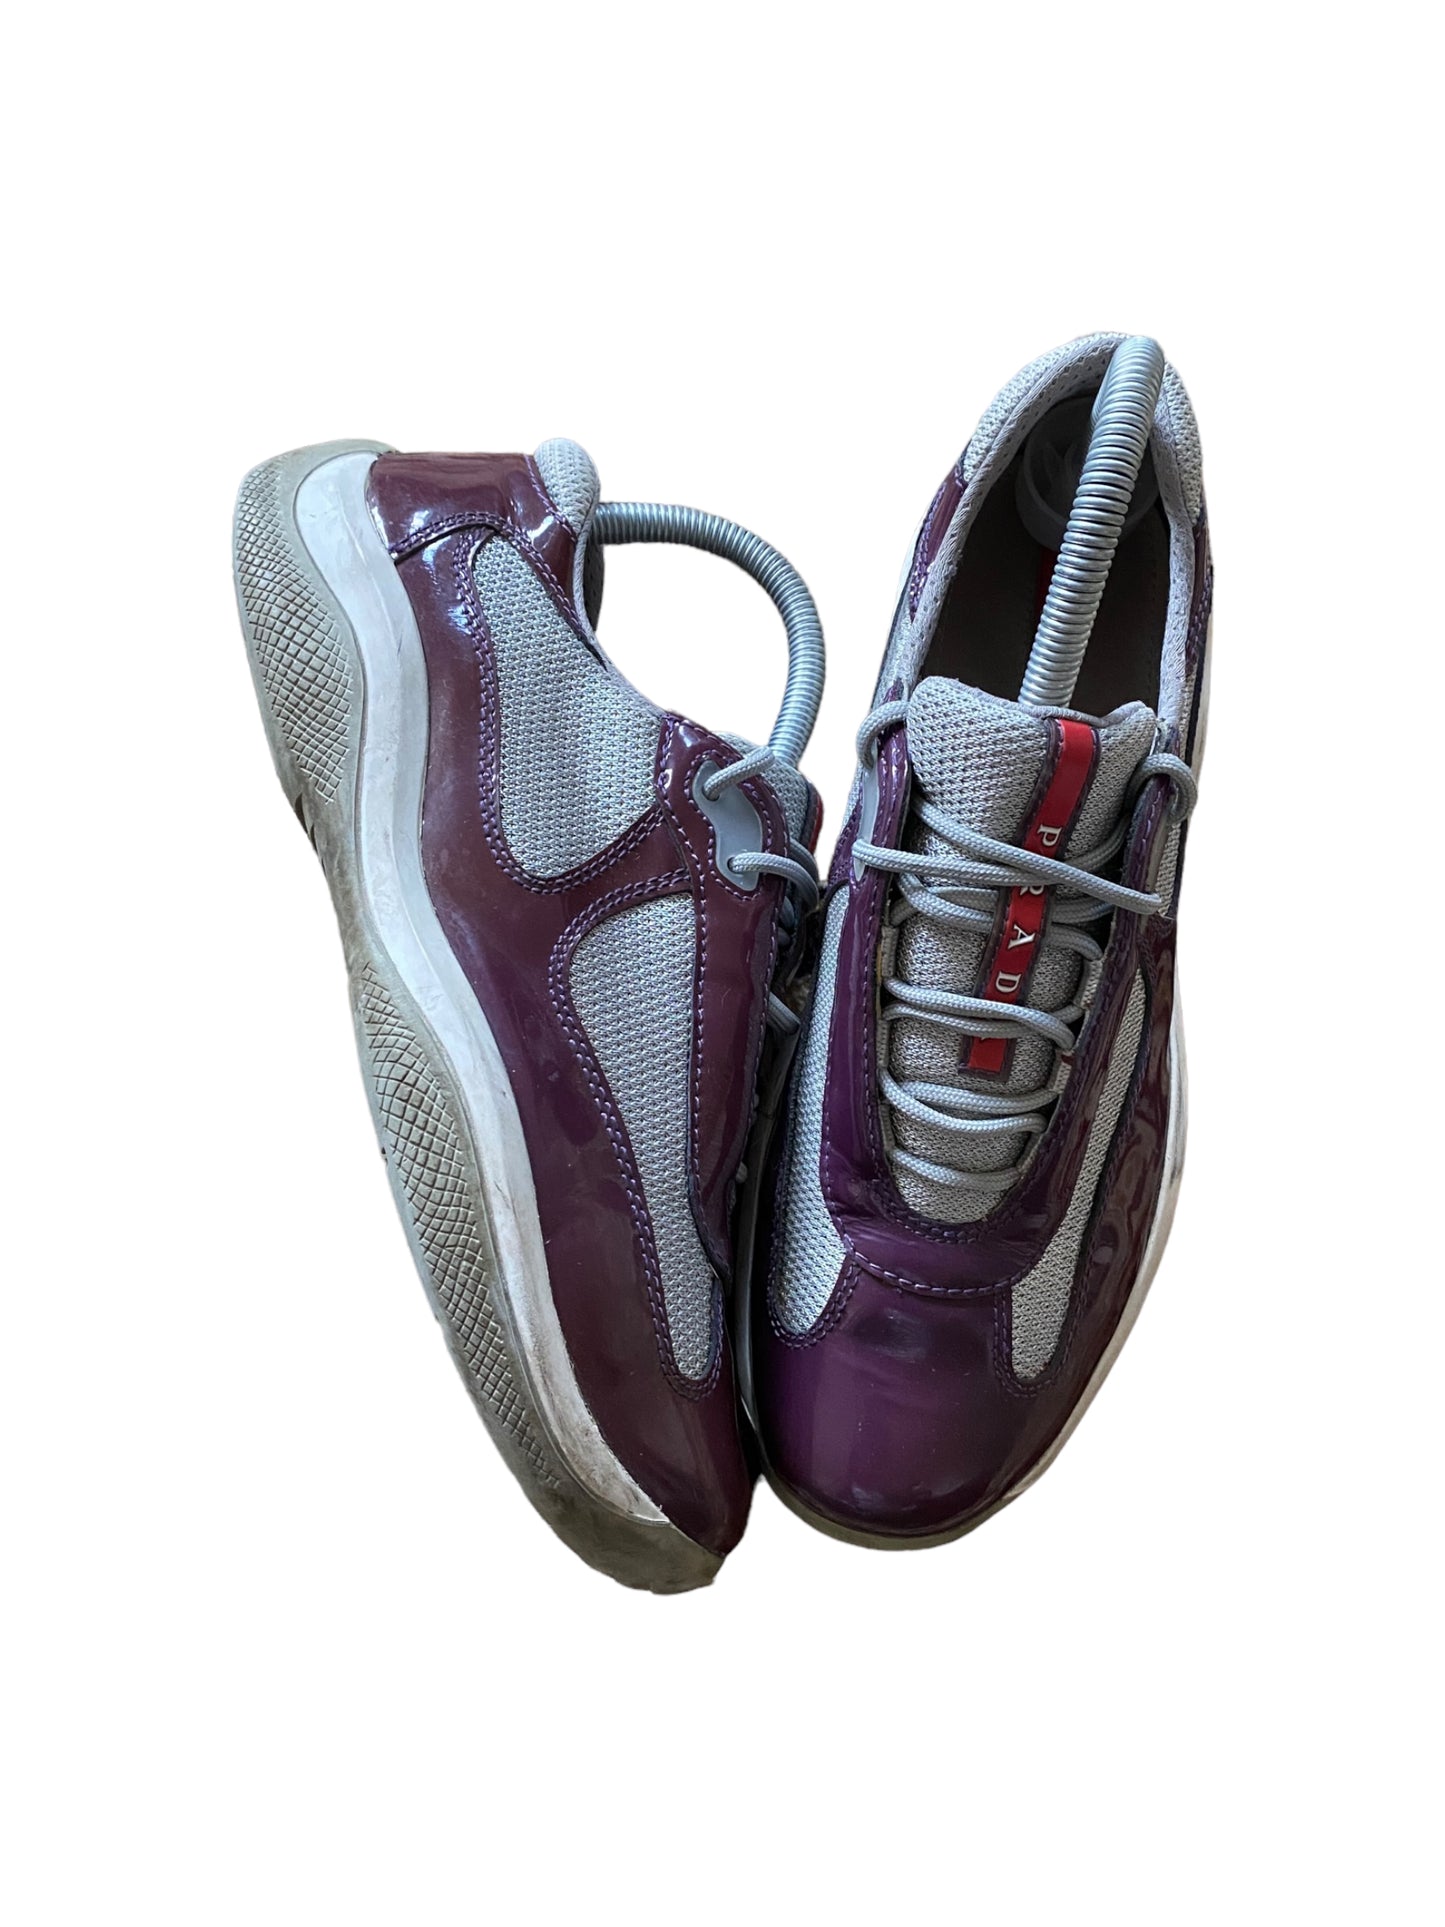 PRADA PURPLE LEATHER PATENT VERNIS AMERCA’S CUP SHOES